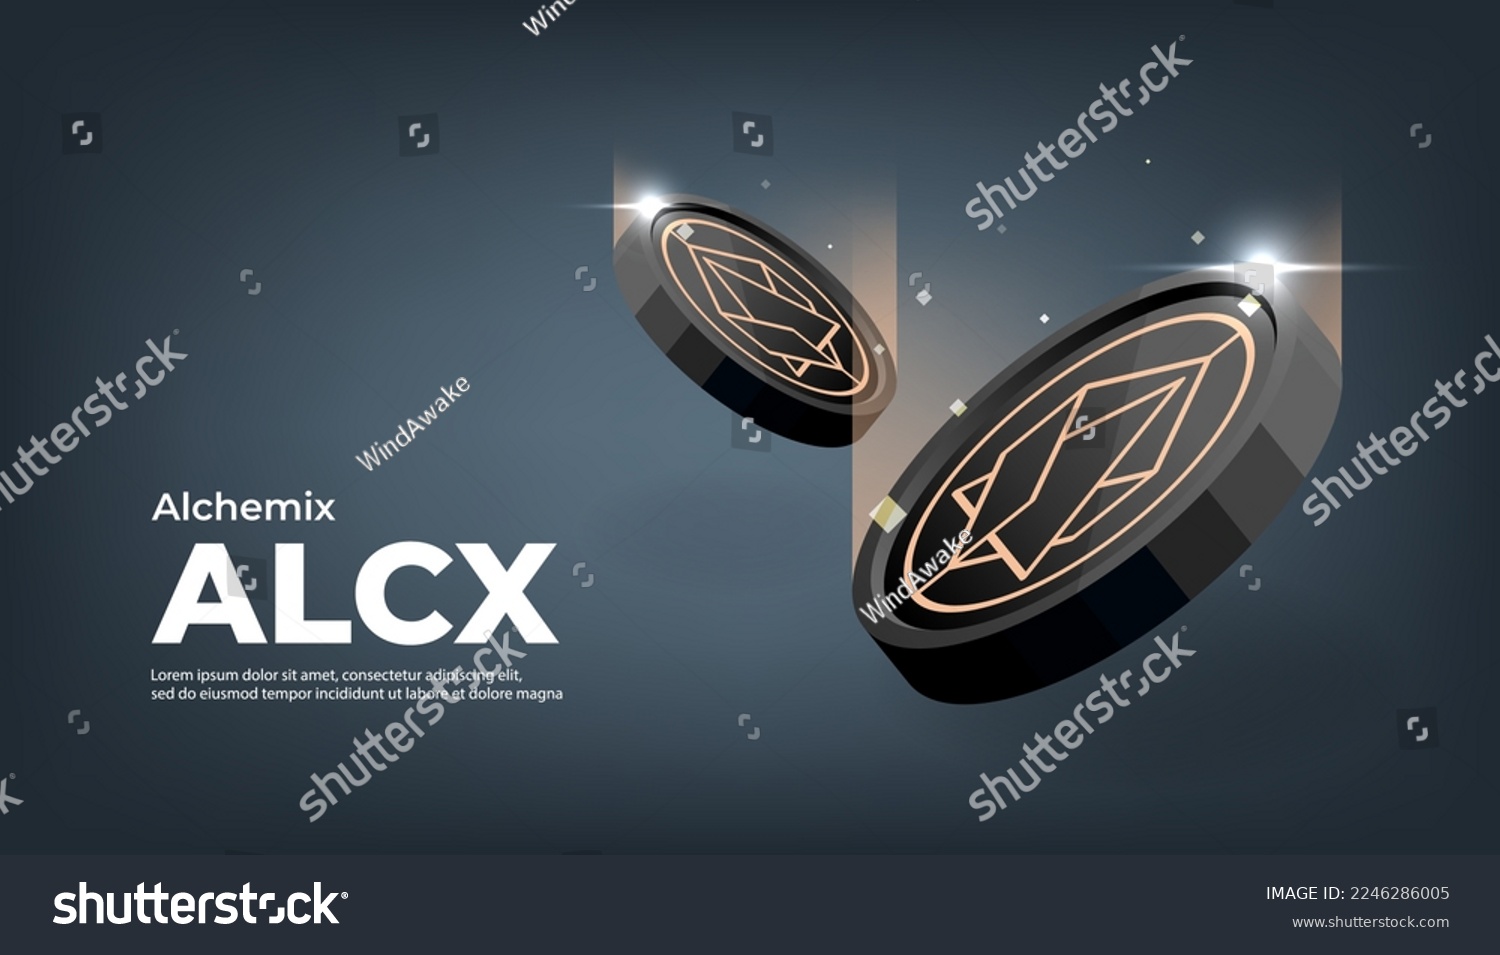 SVG of Alchemix (ALCX) coin crypto currency themed banner. ALCX icon on modern black color background. svg